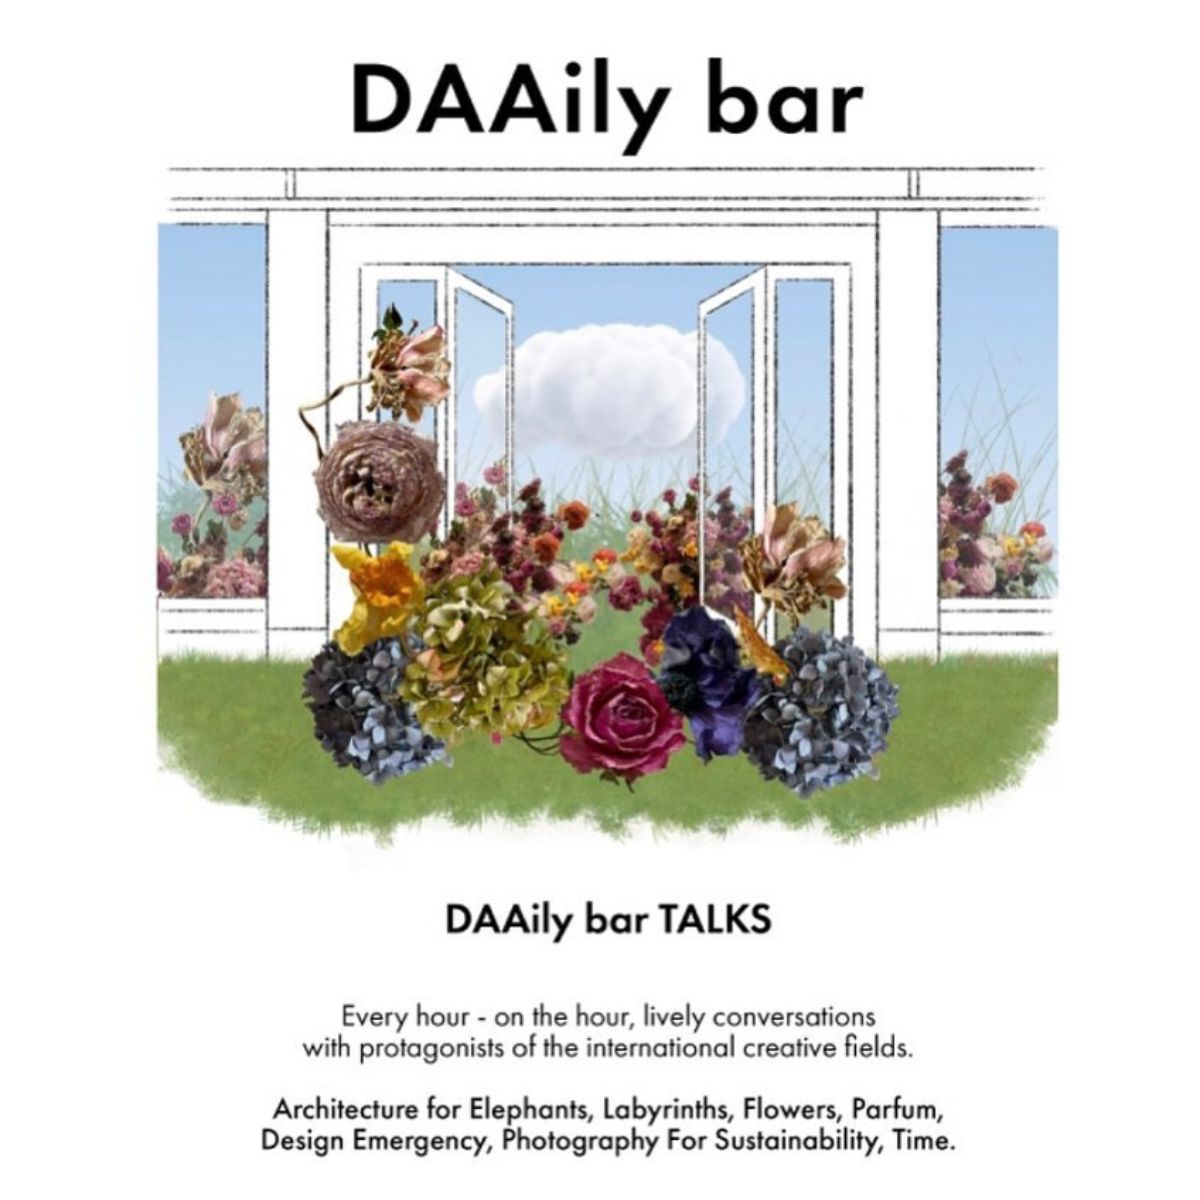 DAAily Bar floral installment by Anne Vitchen has open invitation for anyone in Milan on Thursd